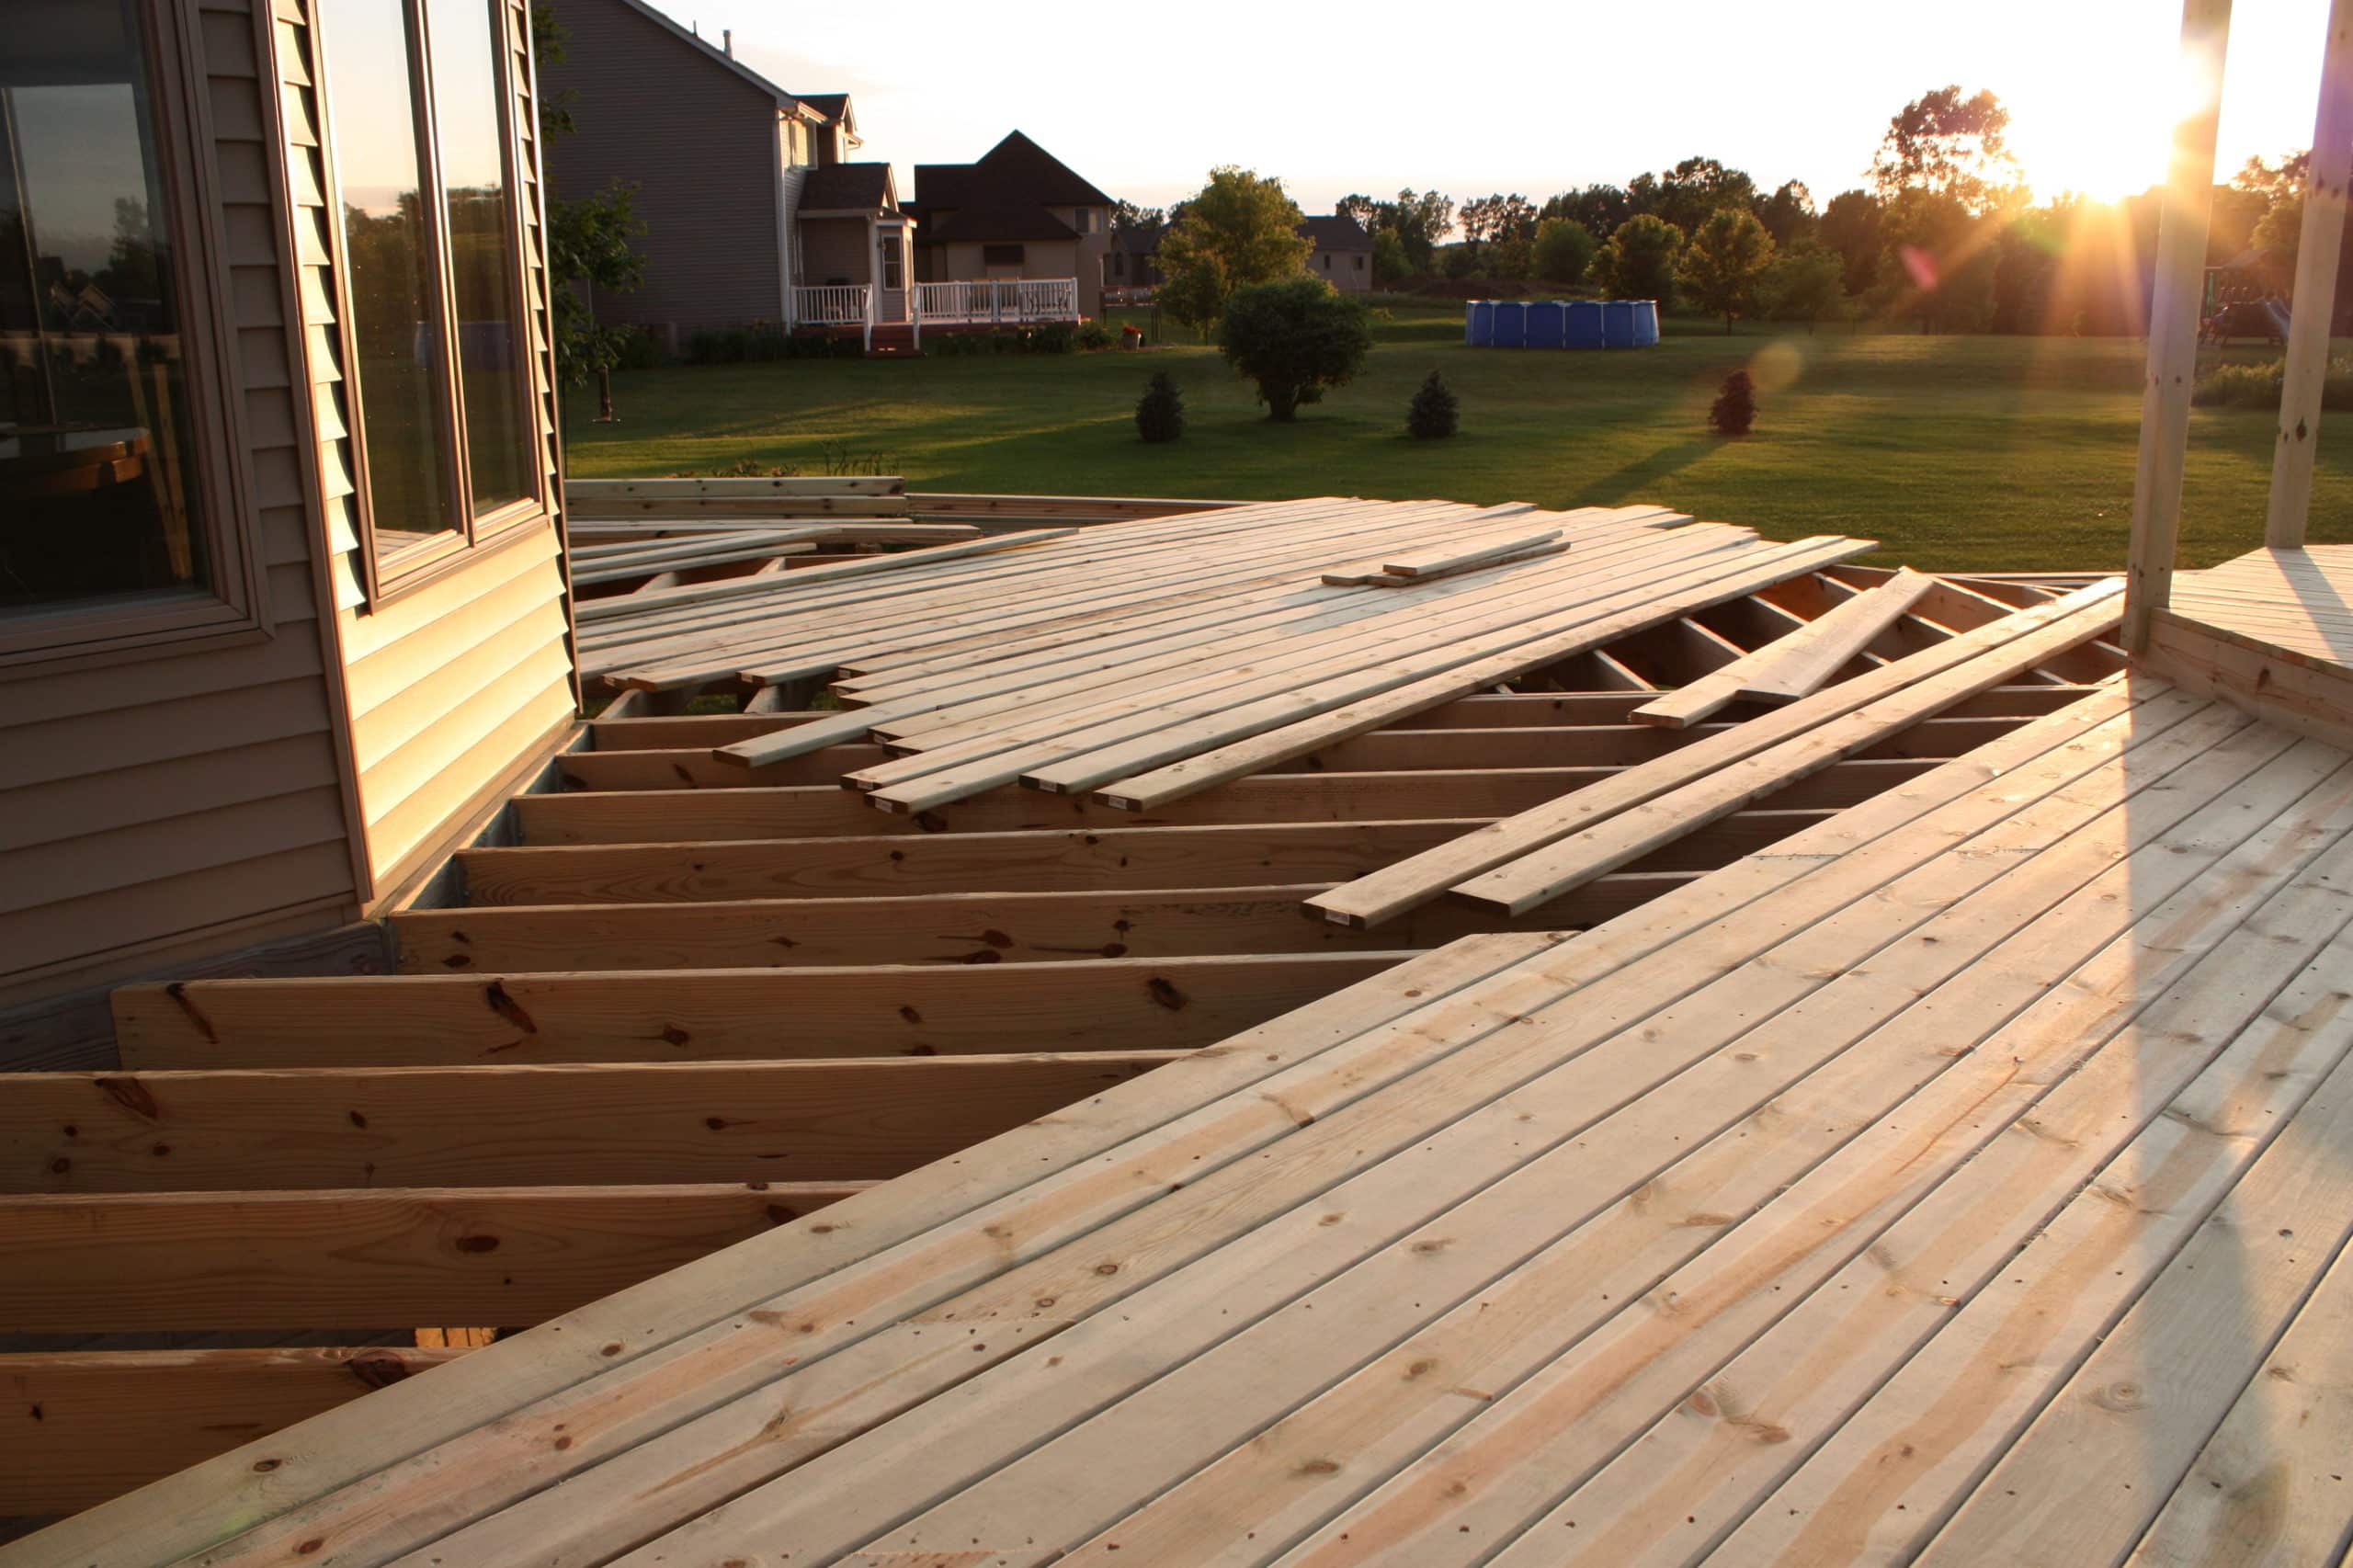 Cut lumber sits on top of a partially built deck with a beautiful sunset in the background since the deck and patio business builders have finished for the day.